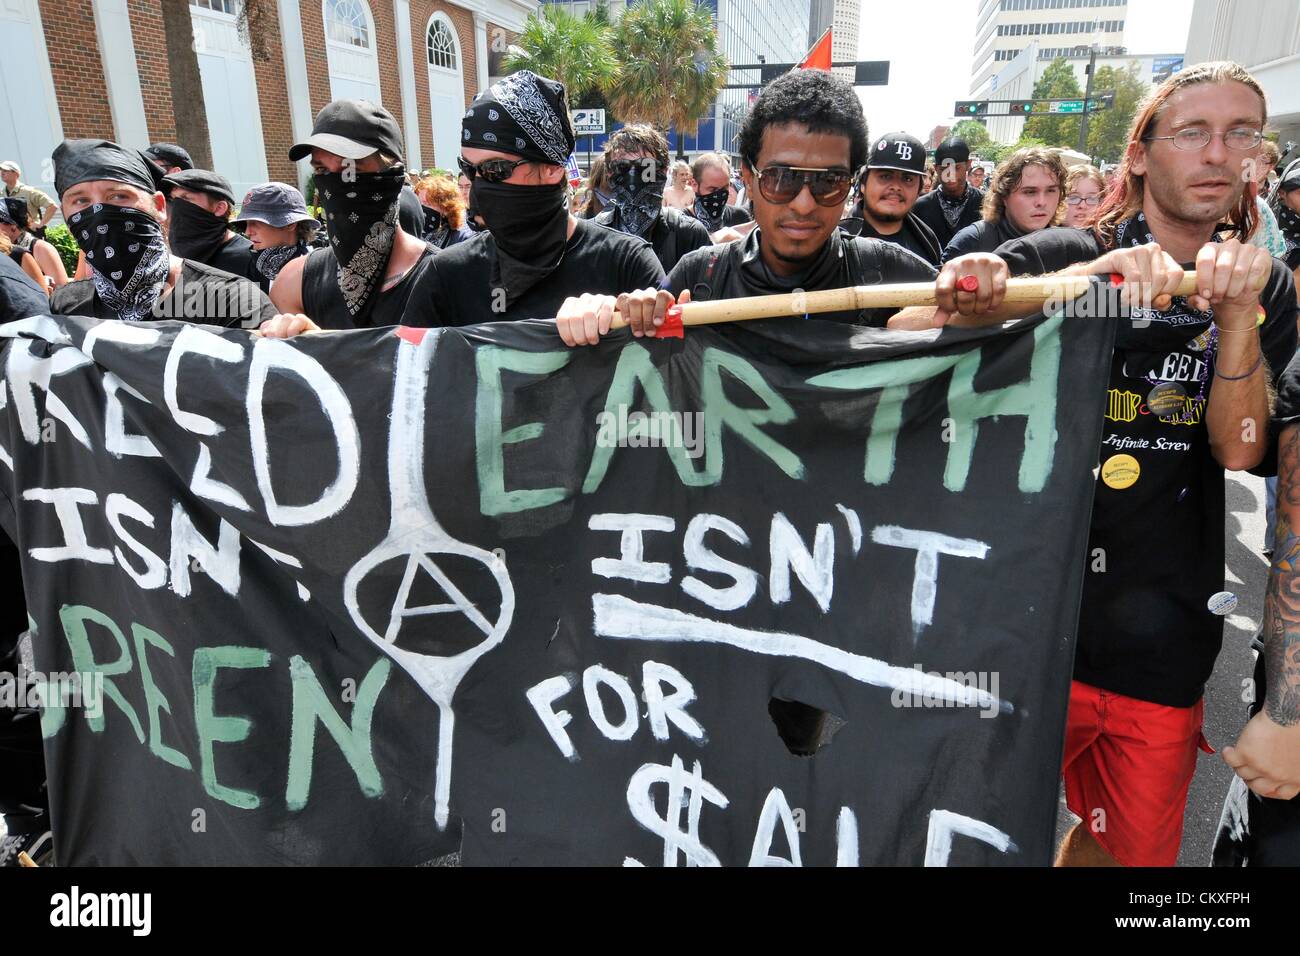 Tampa, Florida, USA. 28th Aug 2012. Black Bloc Protestors march through the streets against the Westboro Baptist Church during the Republican National Convention. Hundreds of protestors  marched through the streets of Tampa against the views of the controversial religious group. (Photo/Chris Post). Credit:  Over X Photography / Alamy Live News Stock Photo